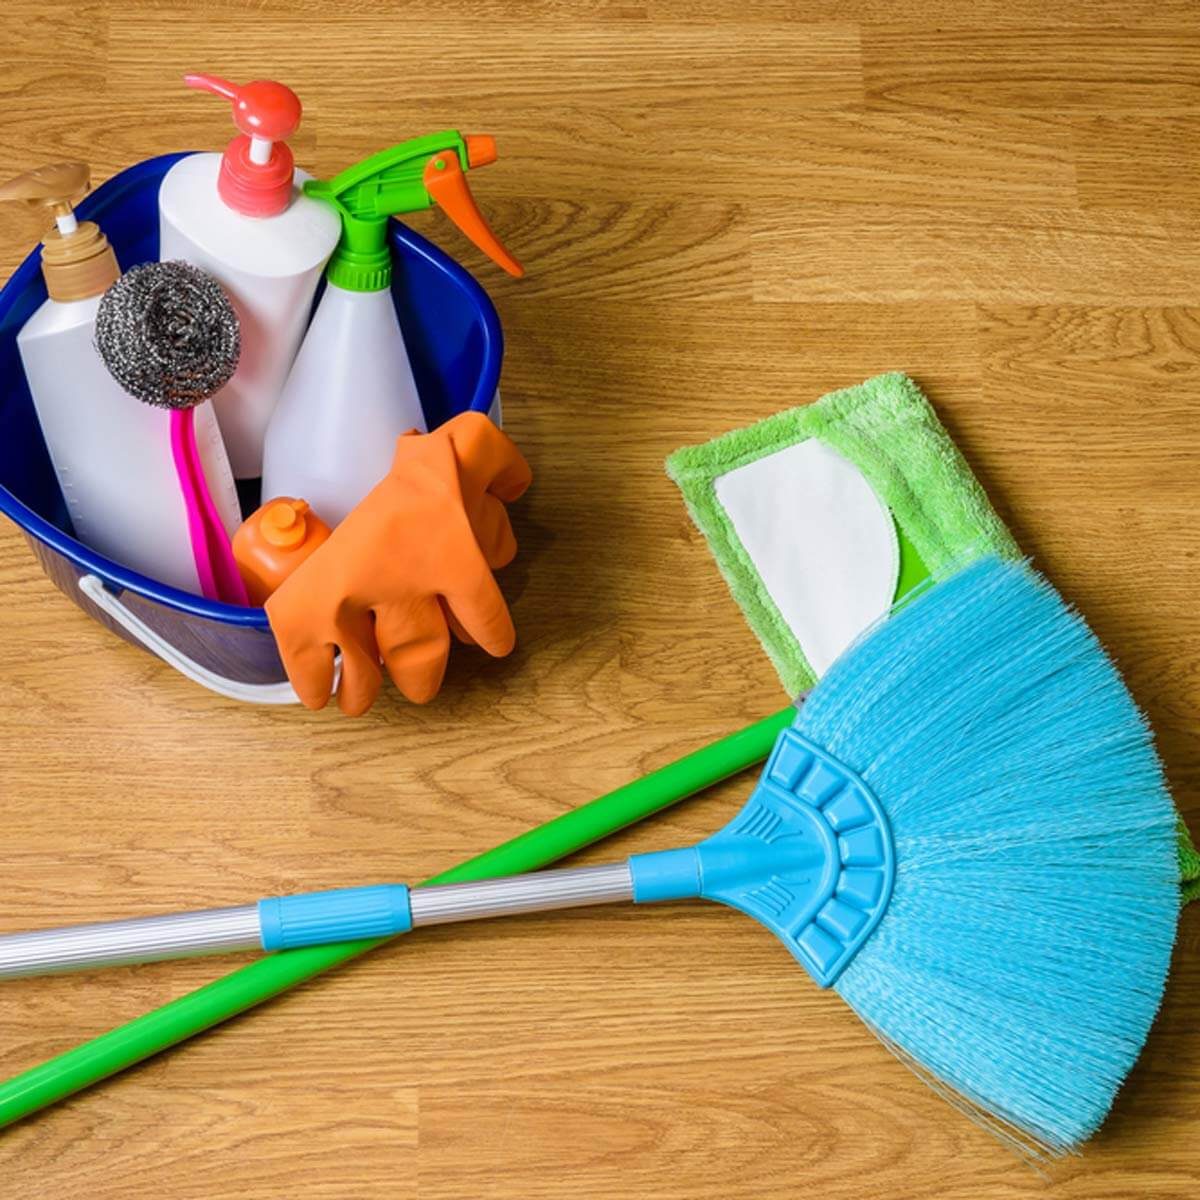 100 Essential Cleaning Hacks for Your Home — The Family Handyman